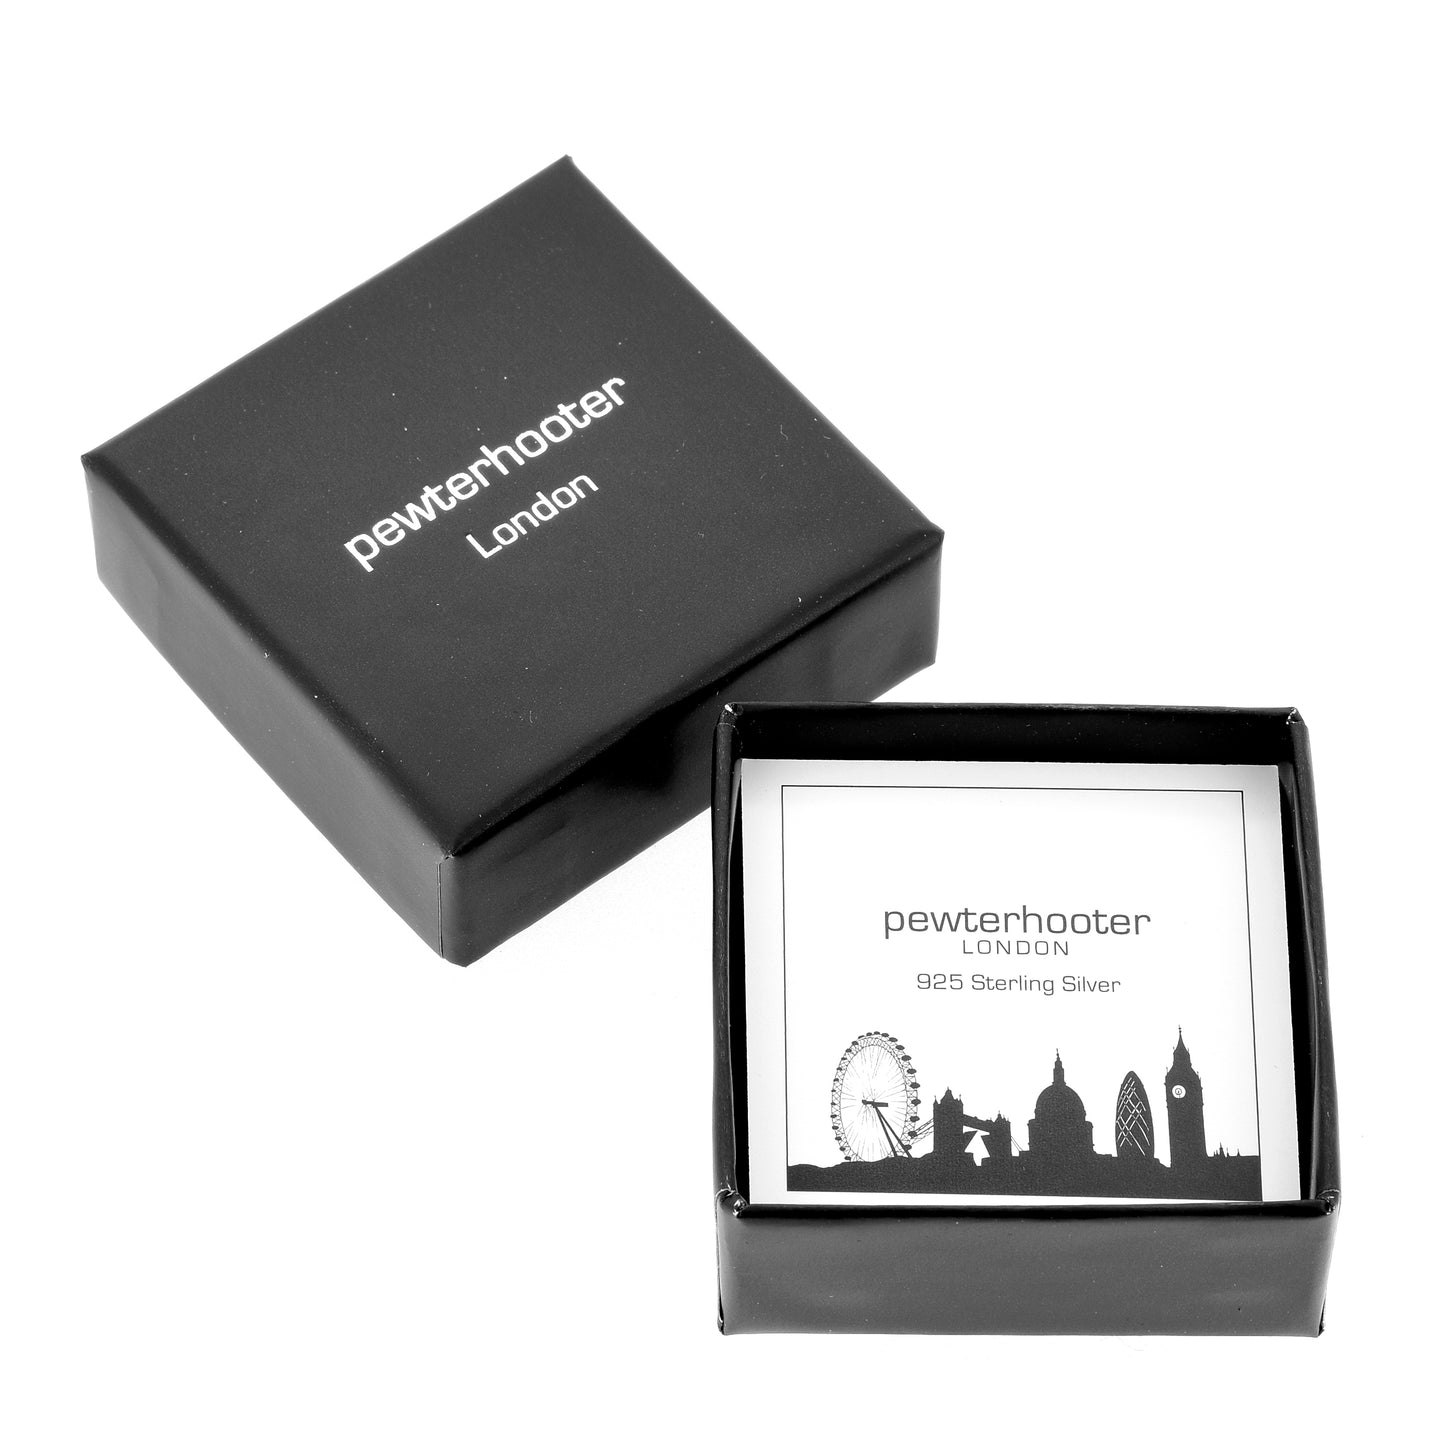 pewterhooter® Women's Classic Collection 925 Sterling silver earrings with sparkling Diamond White channel crystals, packaged in a gift box for any occasion.